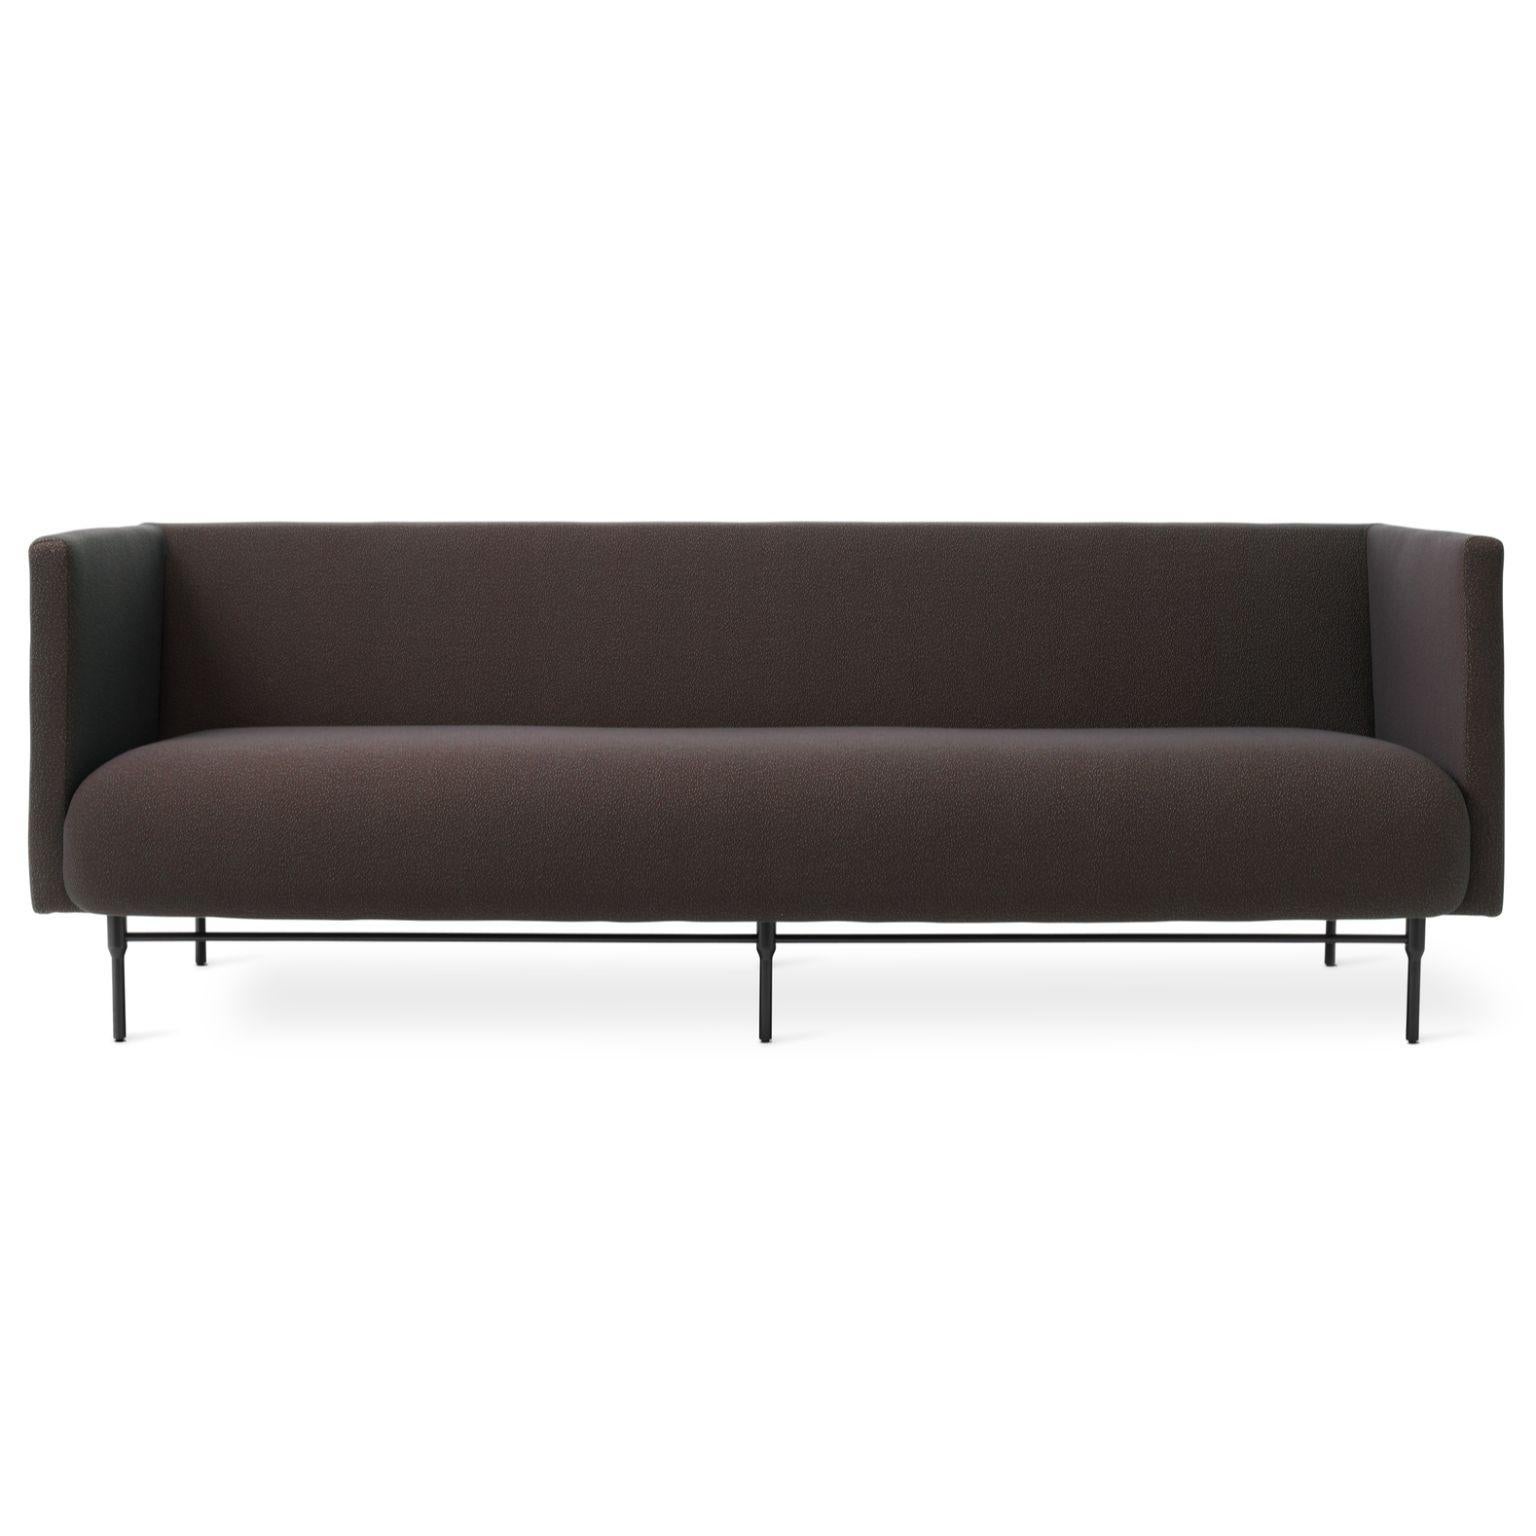 Galore 3 seater sprinkles Mocca by Warm Nordic
Dimensions: D222 x W83 x H 76 cm
Material: Textile upholstery, Powder coated black steel legs, Wooden frame, foam, spring system.
Weight: 62 kg
Also available in different colours and finishes.